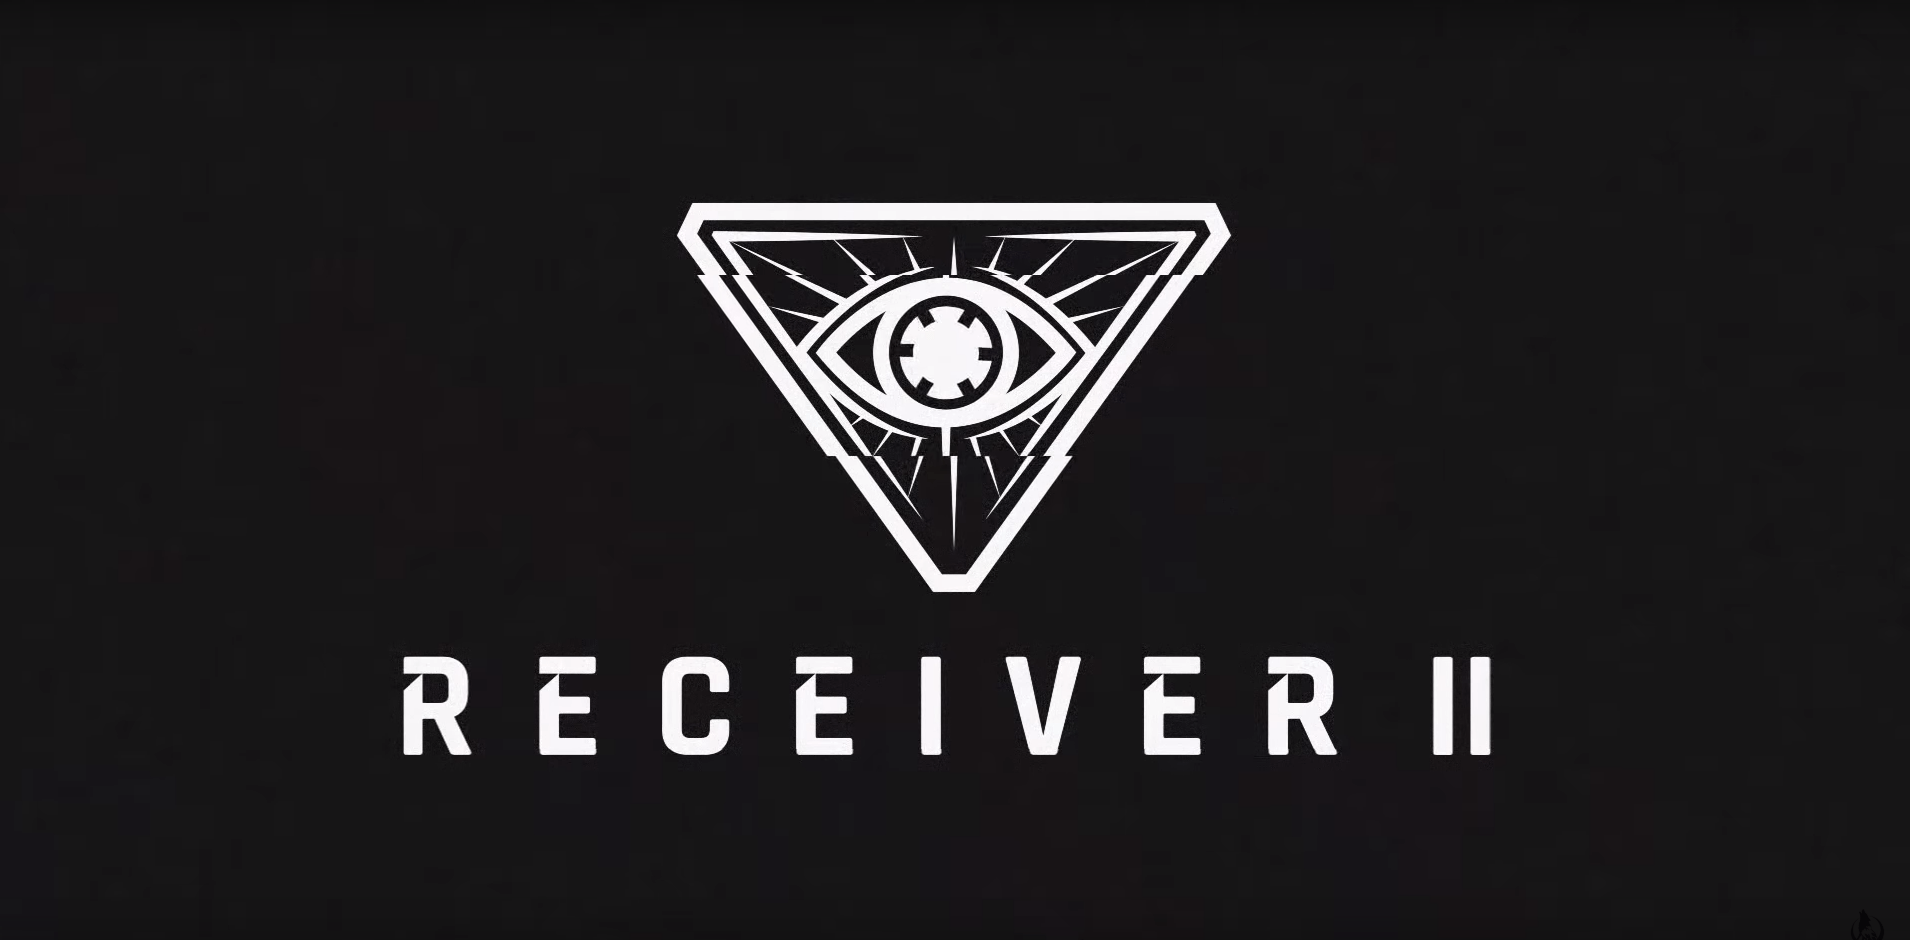 Indie Studio Wolfire Games Announce a Sequel to “Receiver” Planned for Early 2020 Release